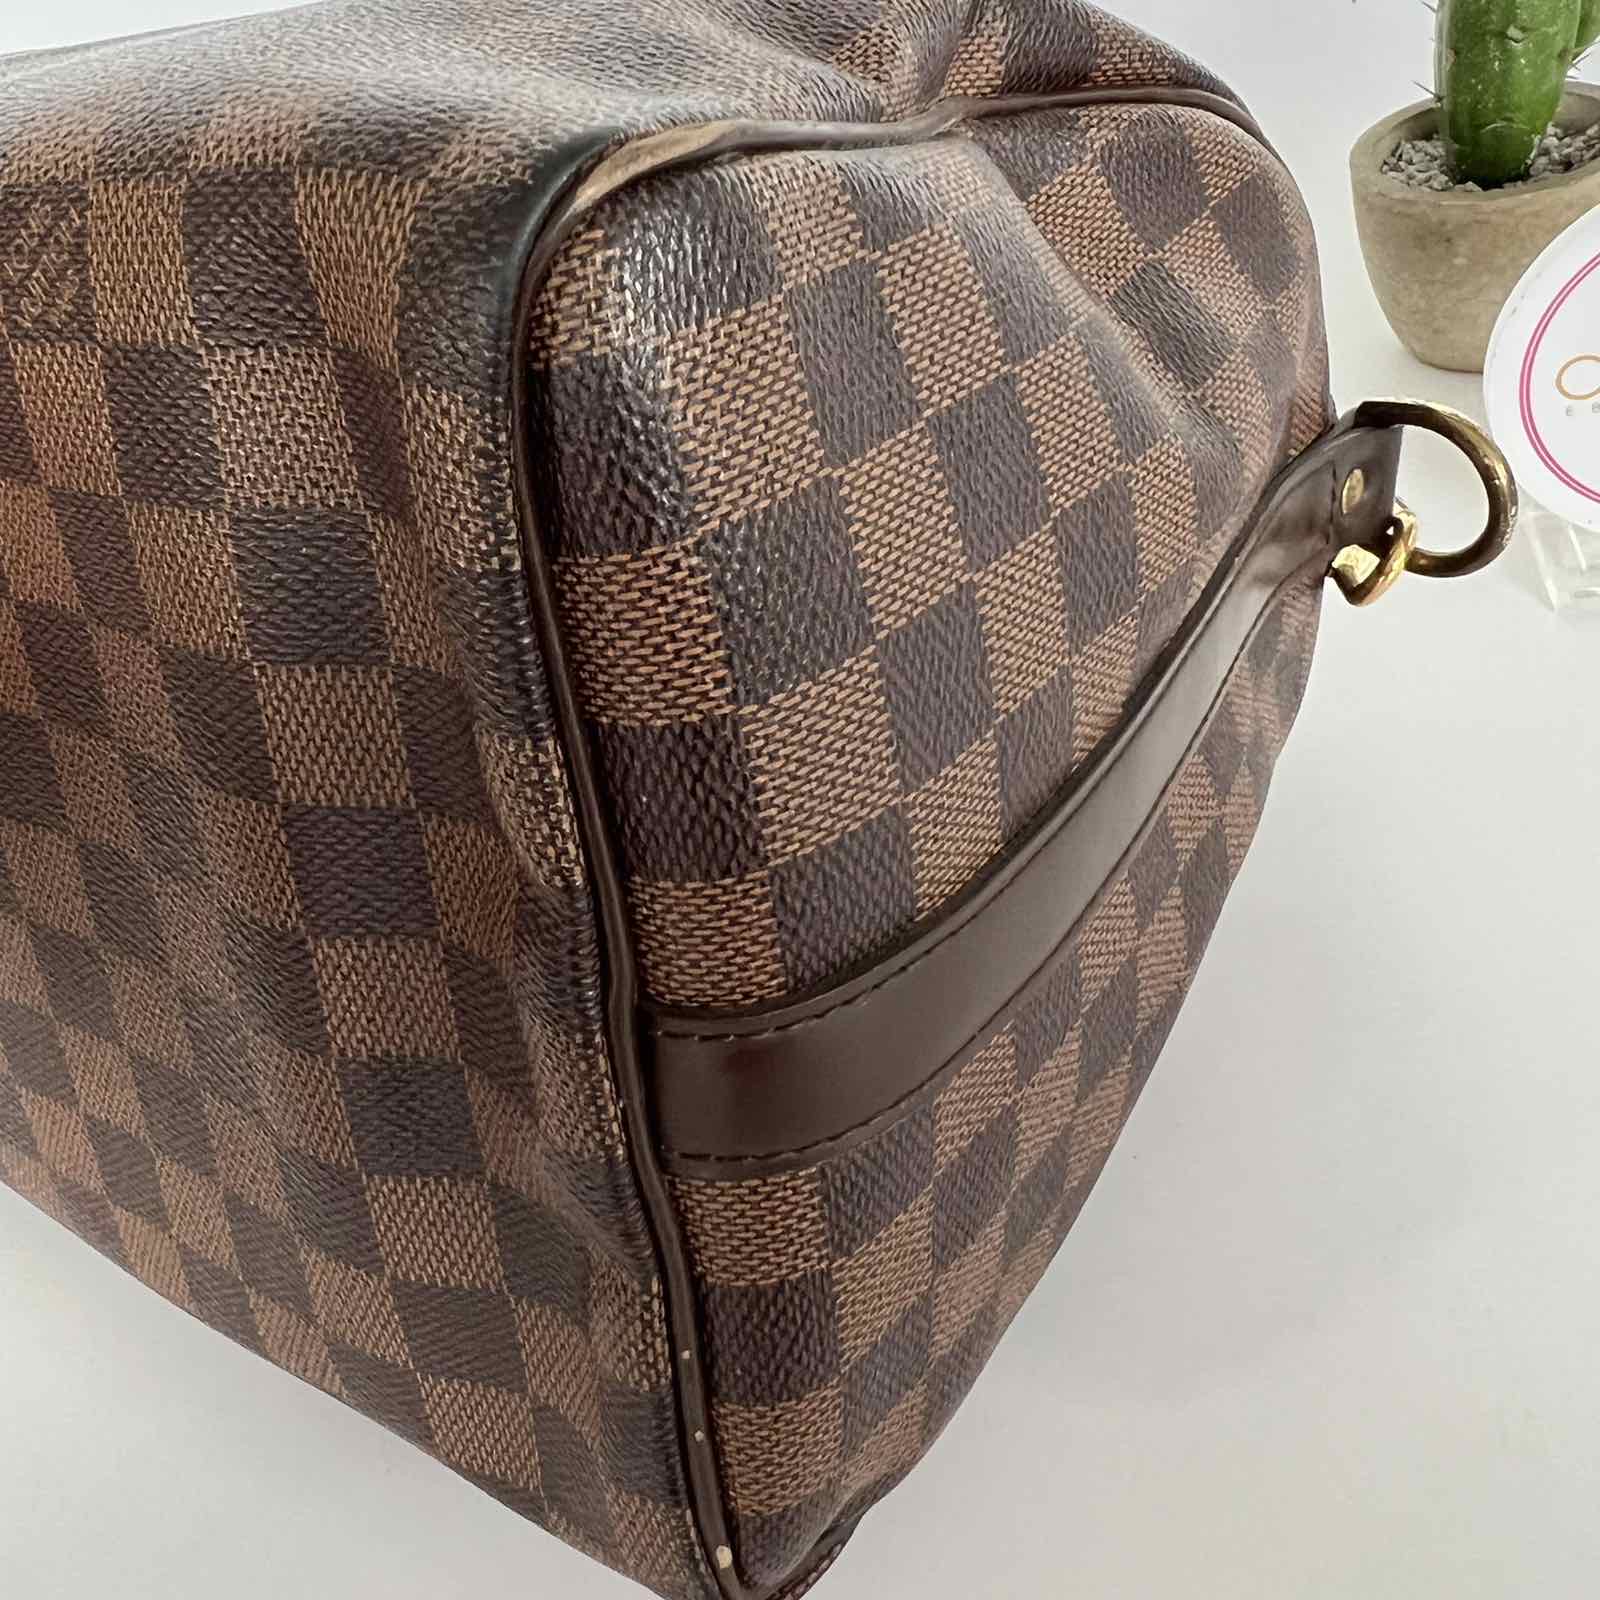 SOLD/LAYAWAY💕 Louis Vuitton Damier Ebene Speedy Bandouliere 30. Made in  France. DC: LA2159. With certificate of authenticity from ENTRUPY.